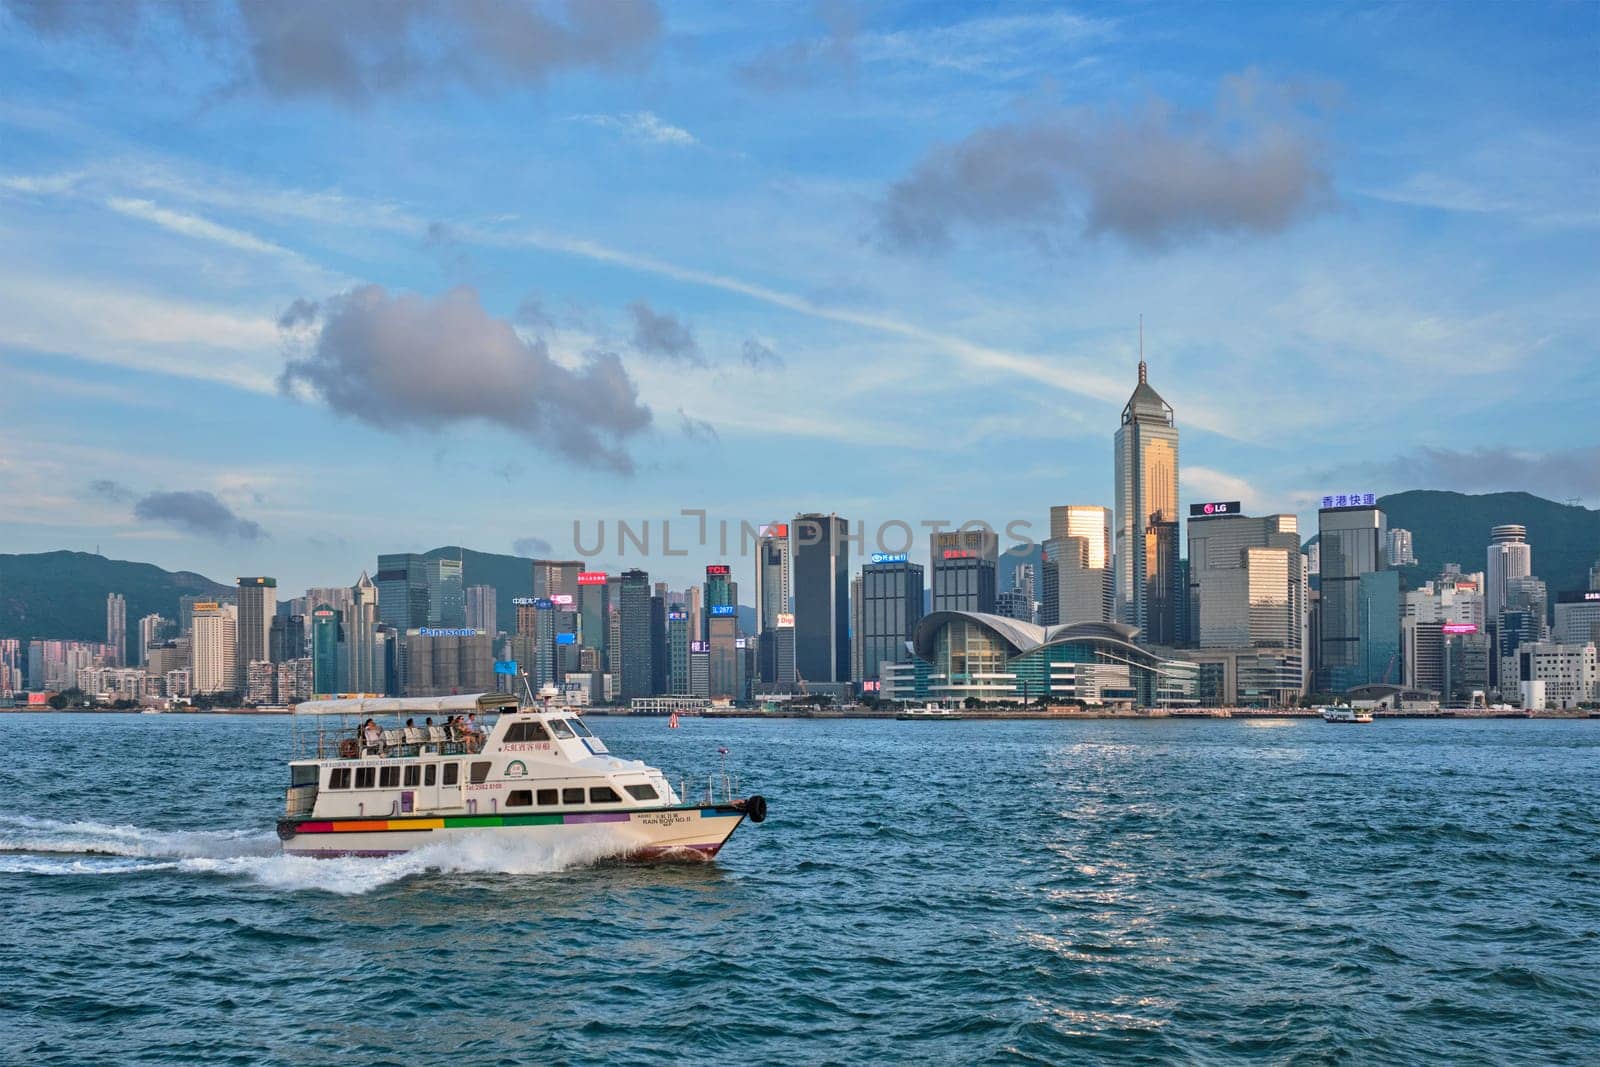 Junk boat in Hong Kong Victoria Harbour by dimol